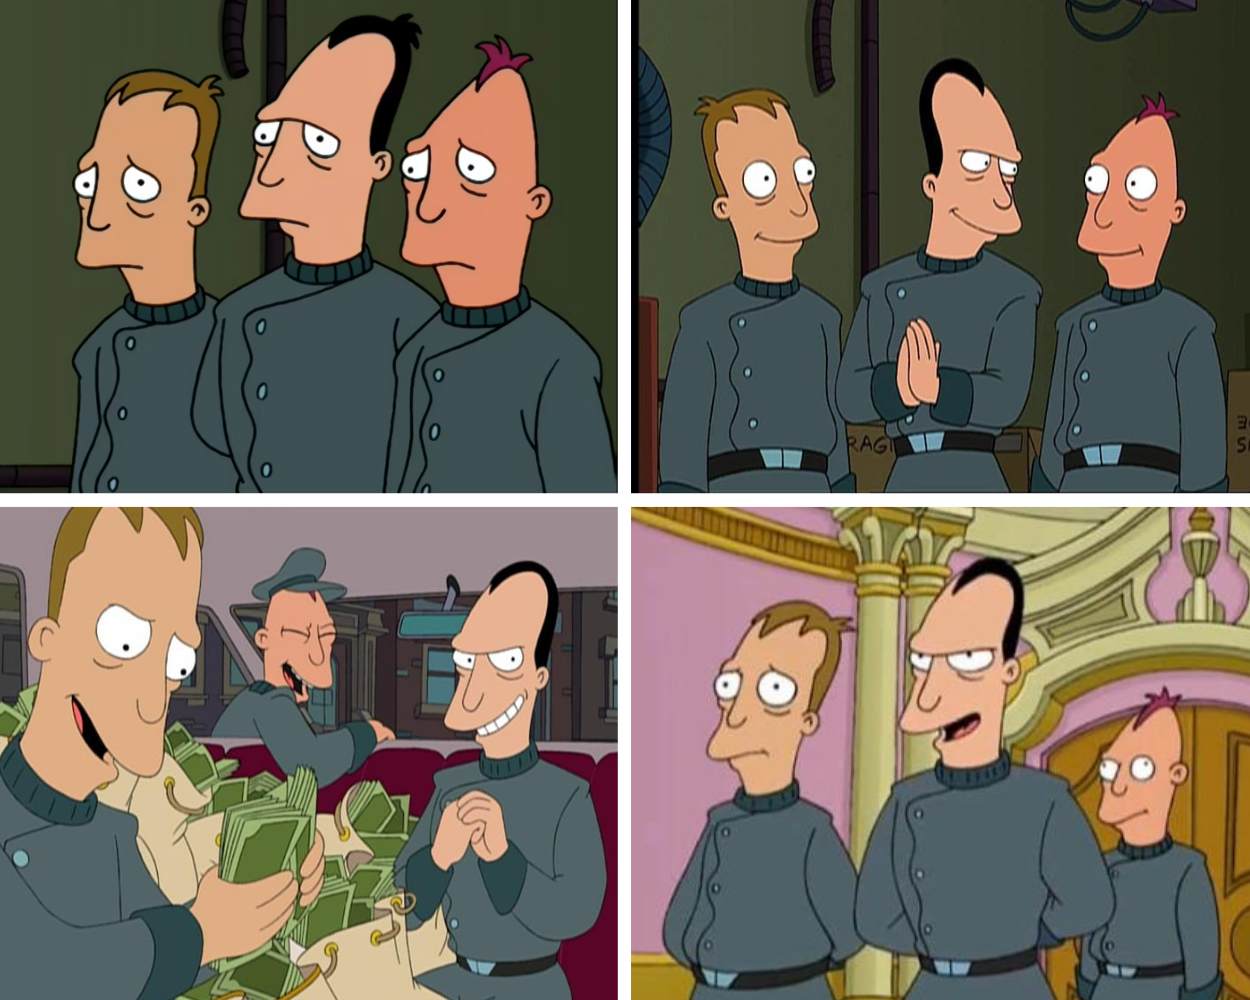 Walt, Larry, and Igner - Characters In Futurama